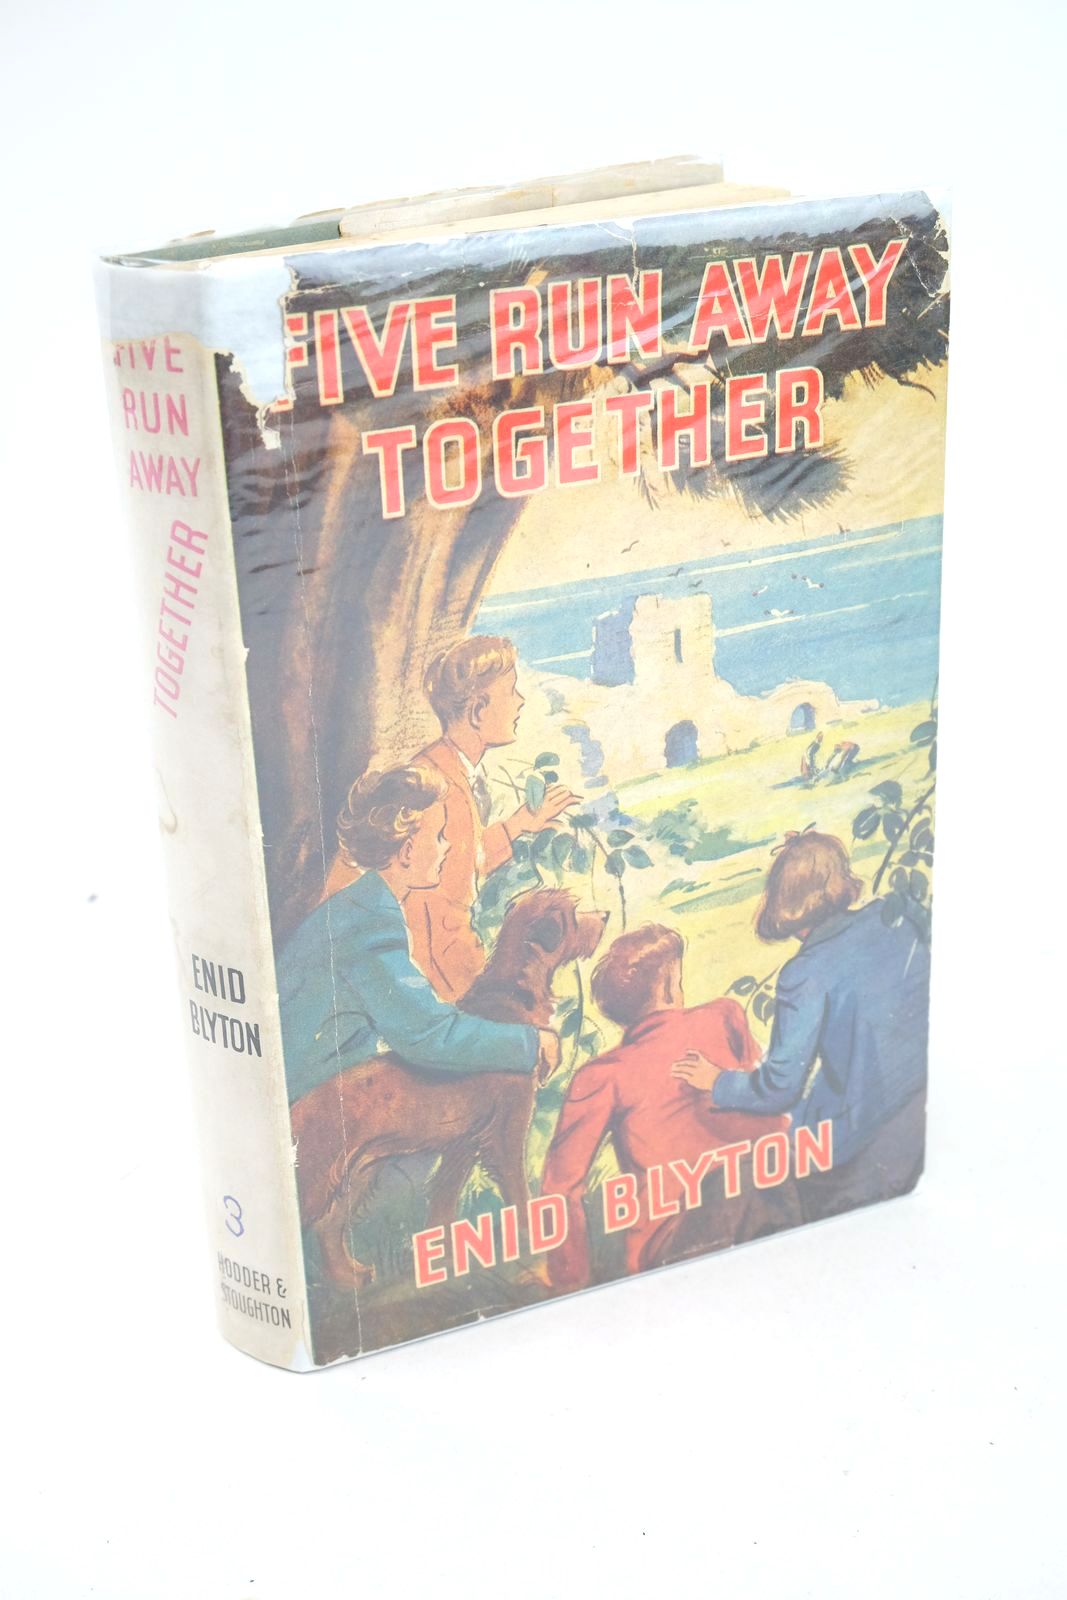 Photo of FIVE RUN AWAY TOGETHER- Stock Number: 1325747